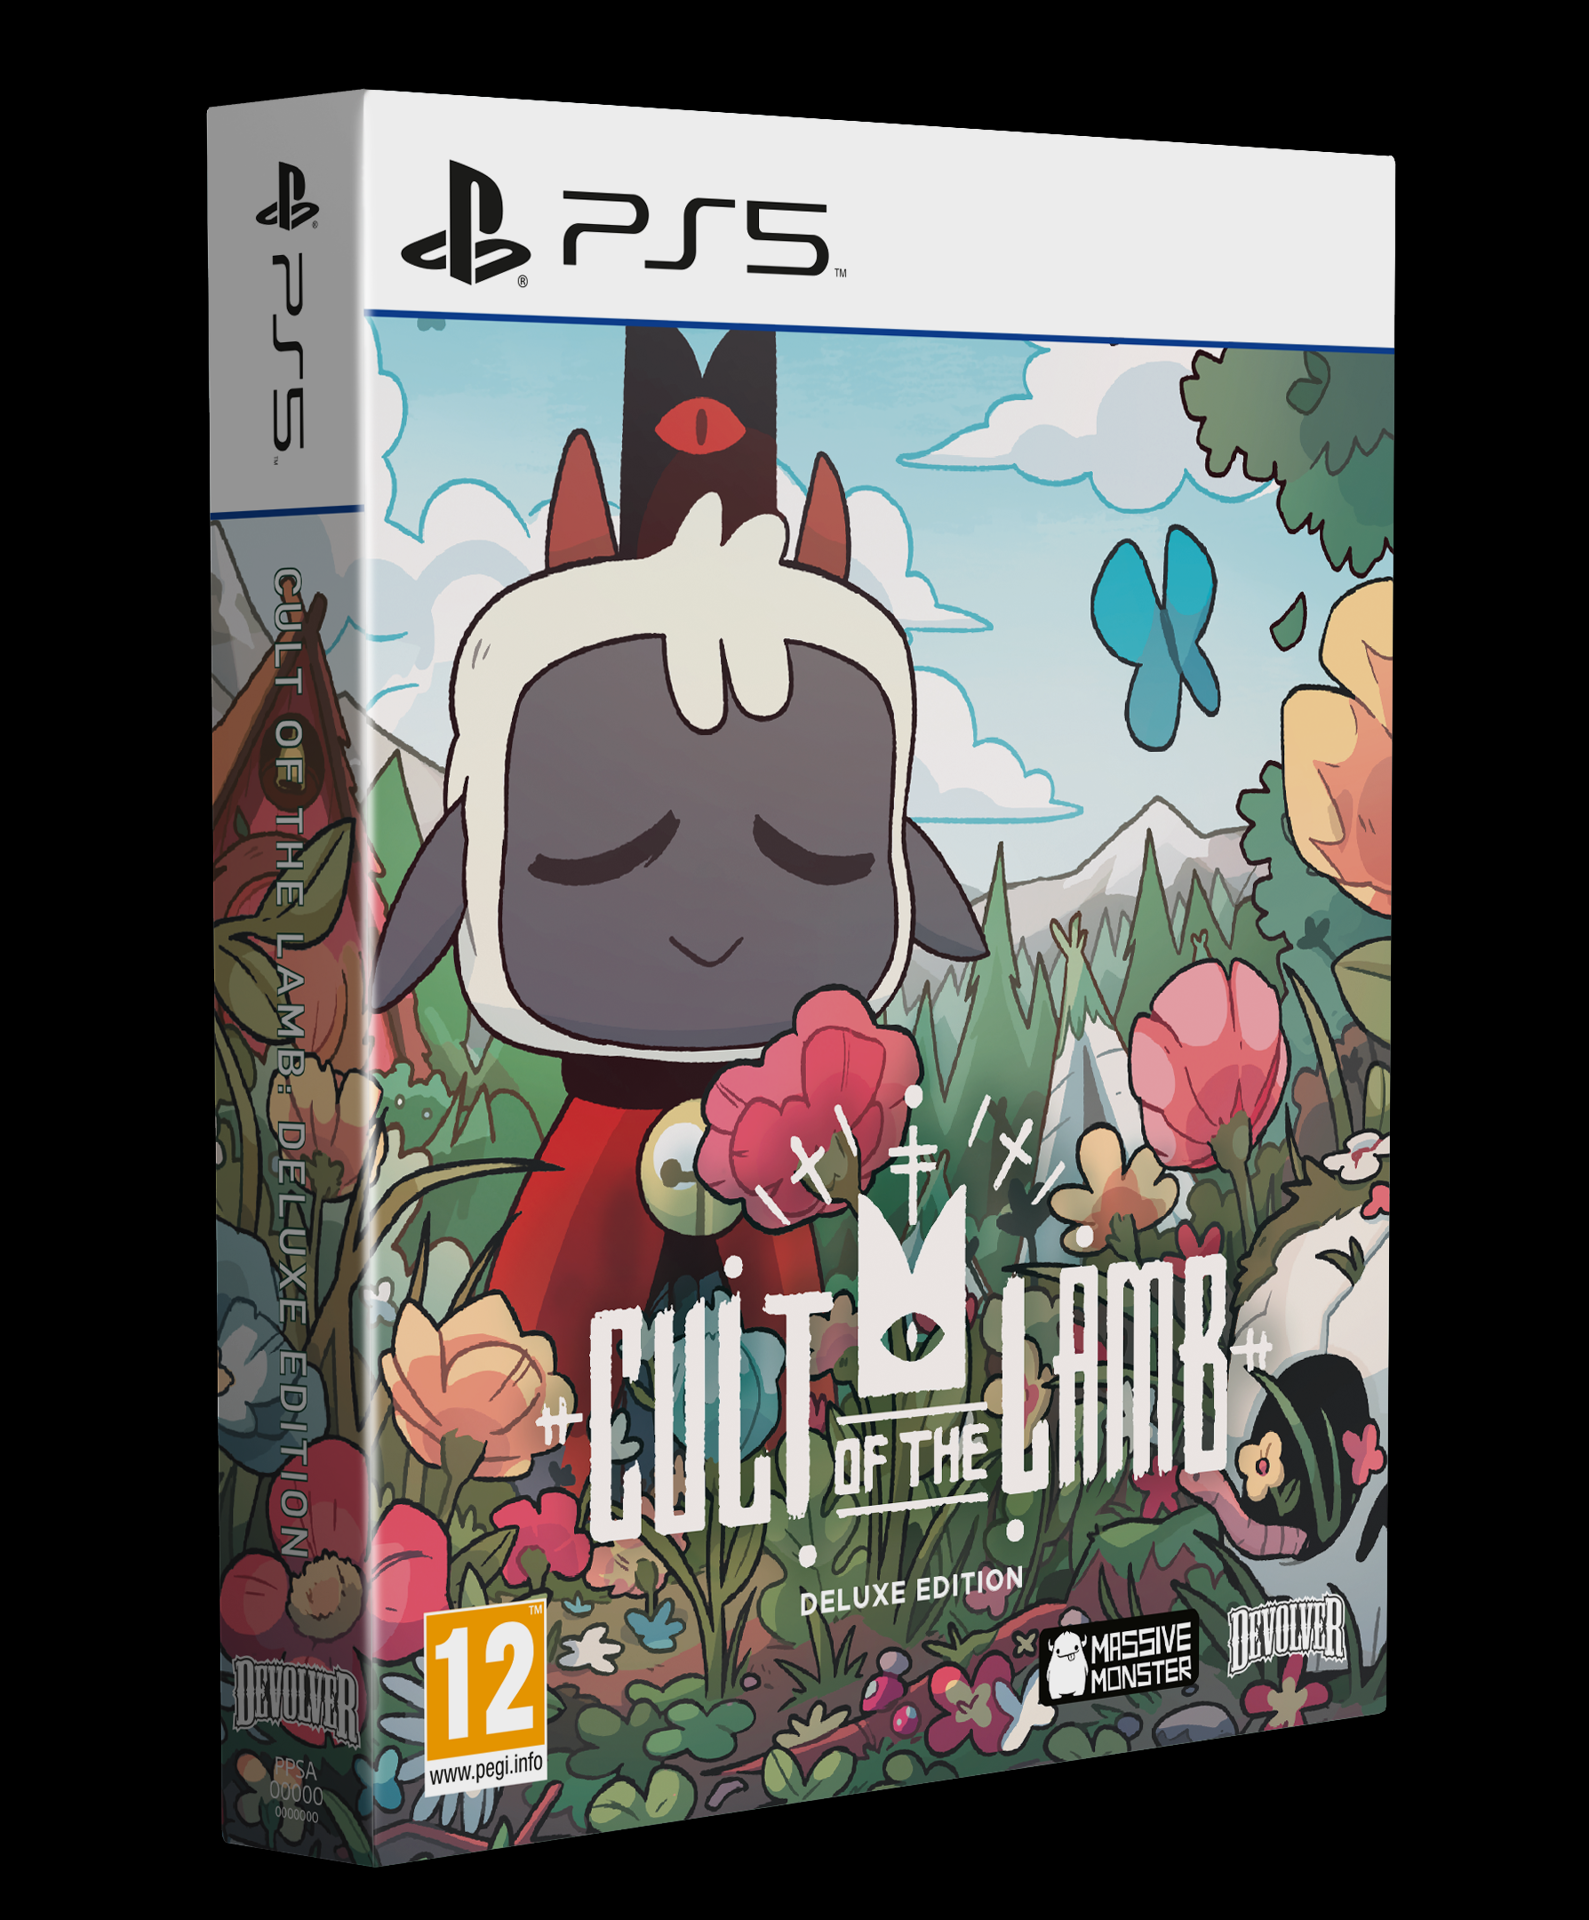 Acheter Cult of the Lamb - Deluxe Edition - Playstation 5 prix promo neuf  et occasion pas cher